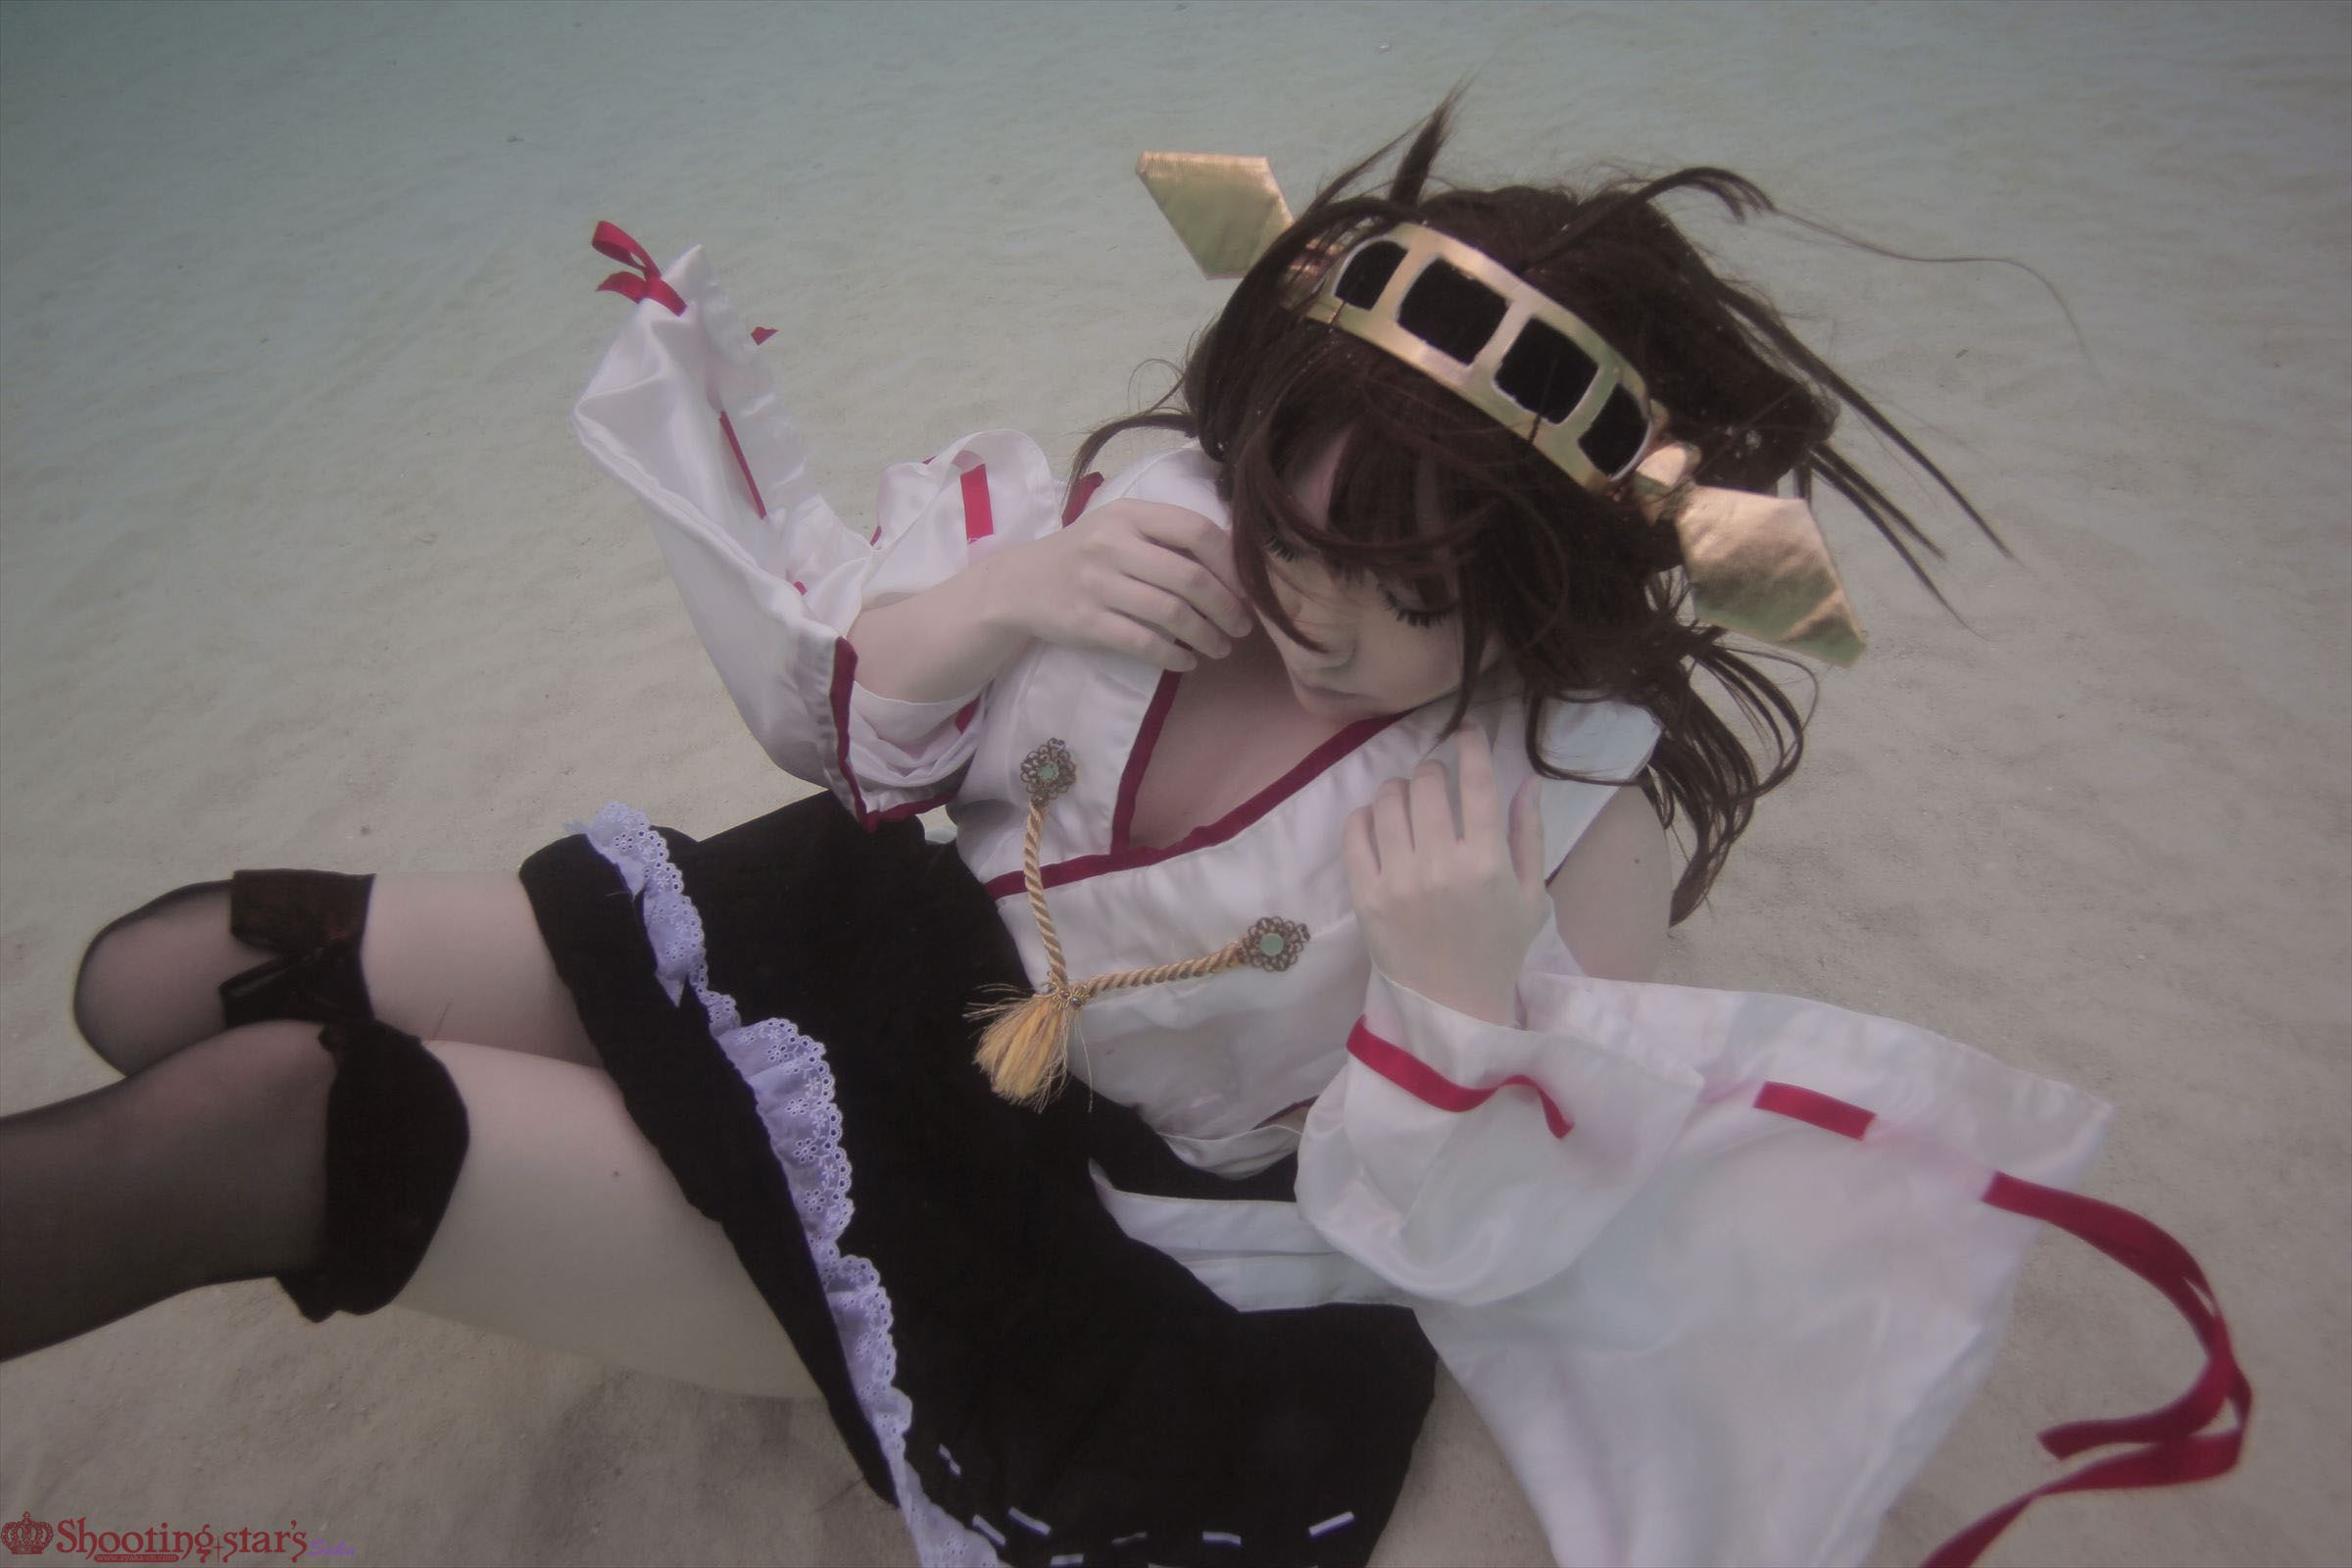 [Cospley] Sexy Kongou from Kantai Collection under the water 之水下系列[73P]